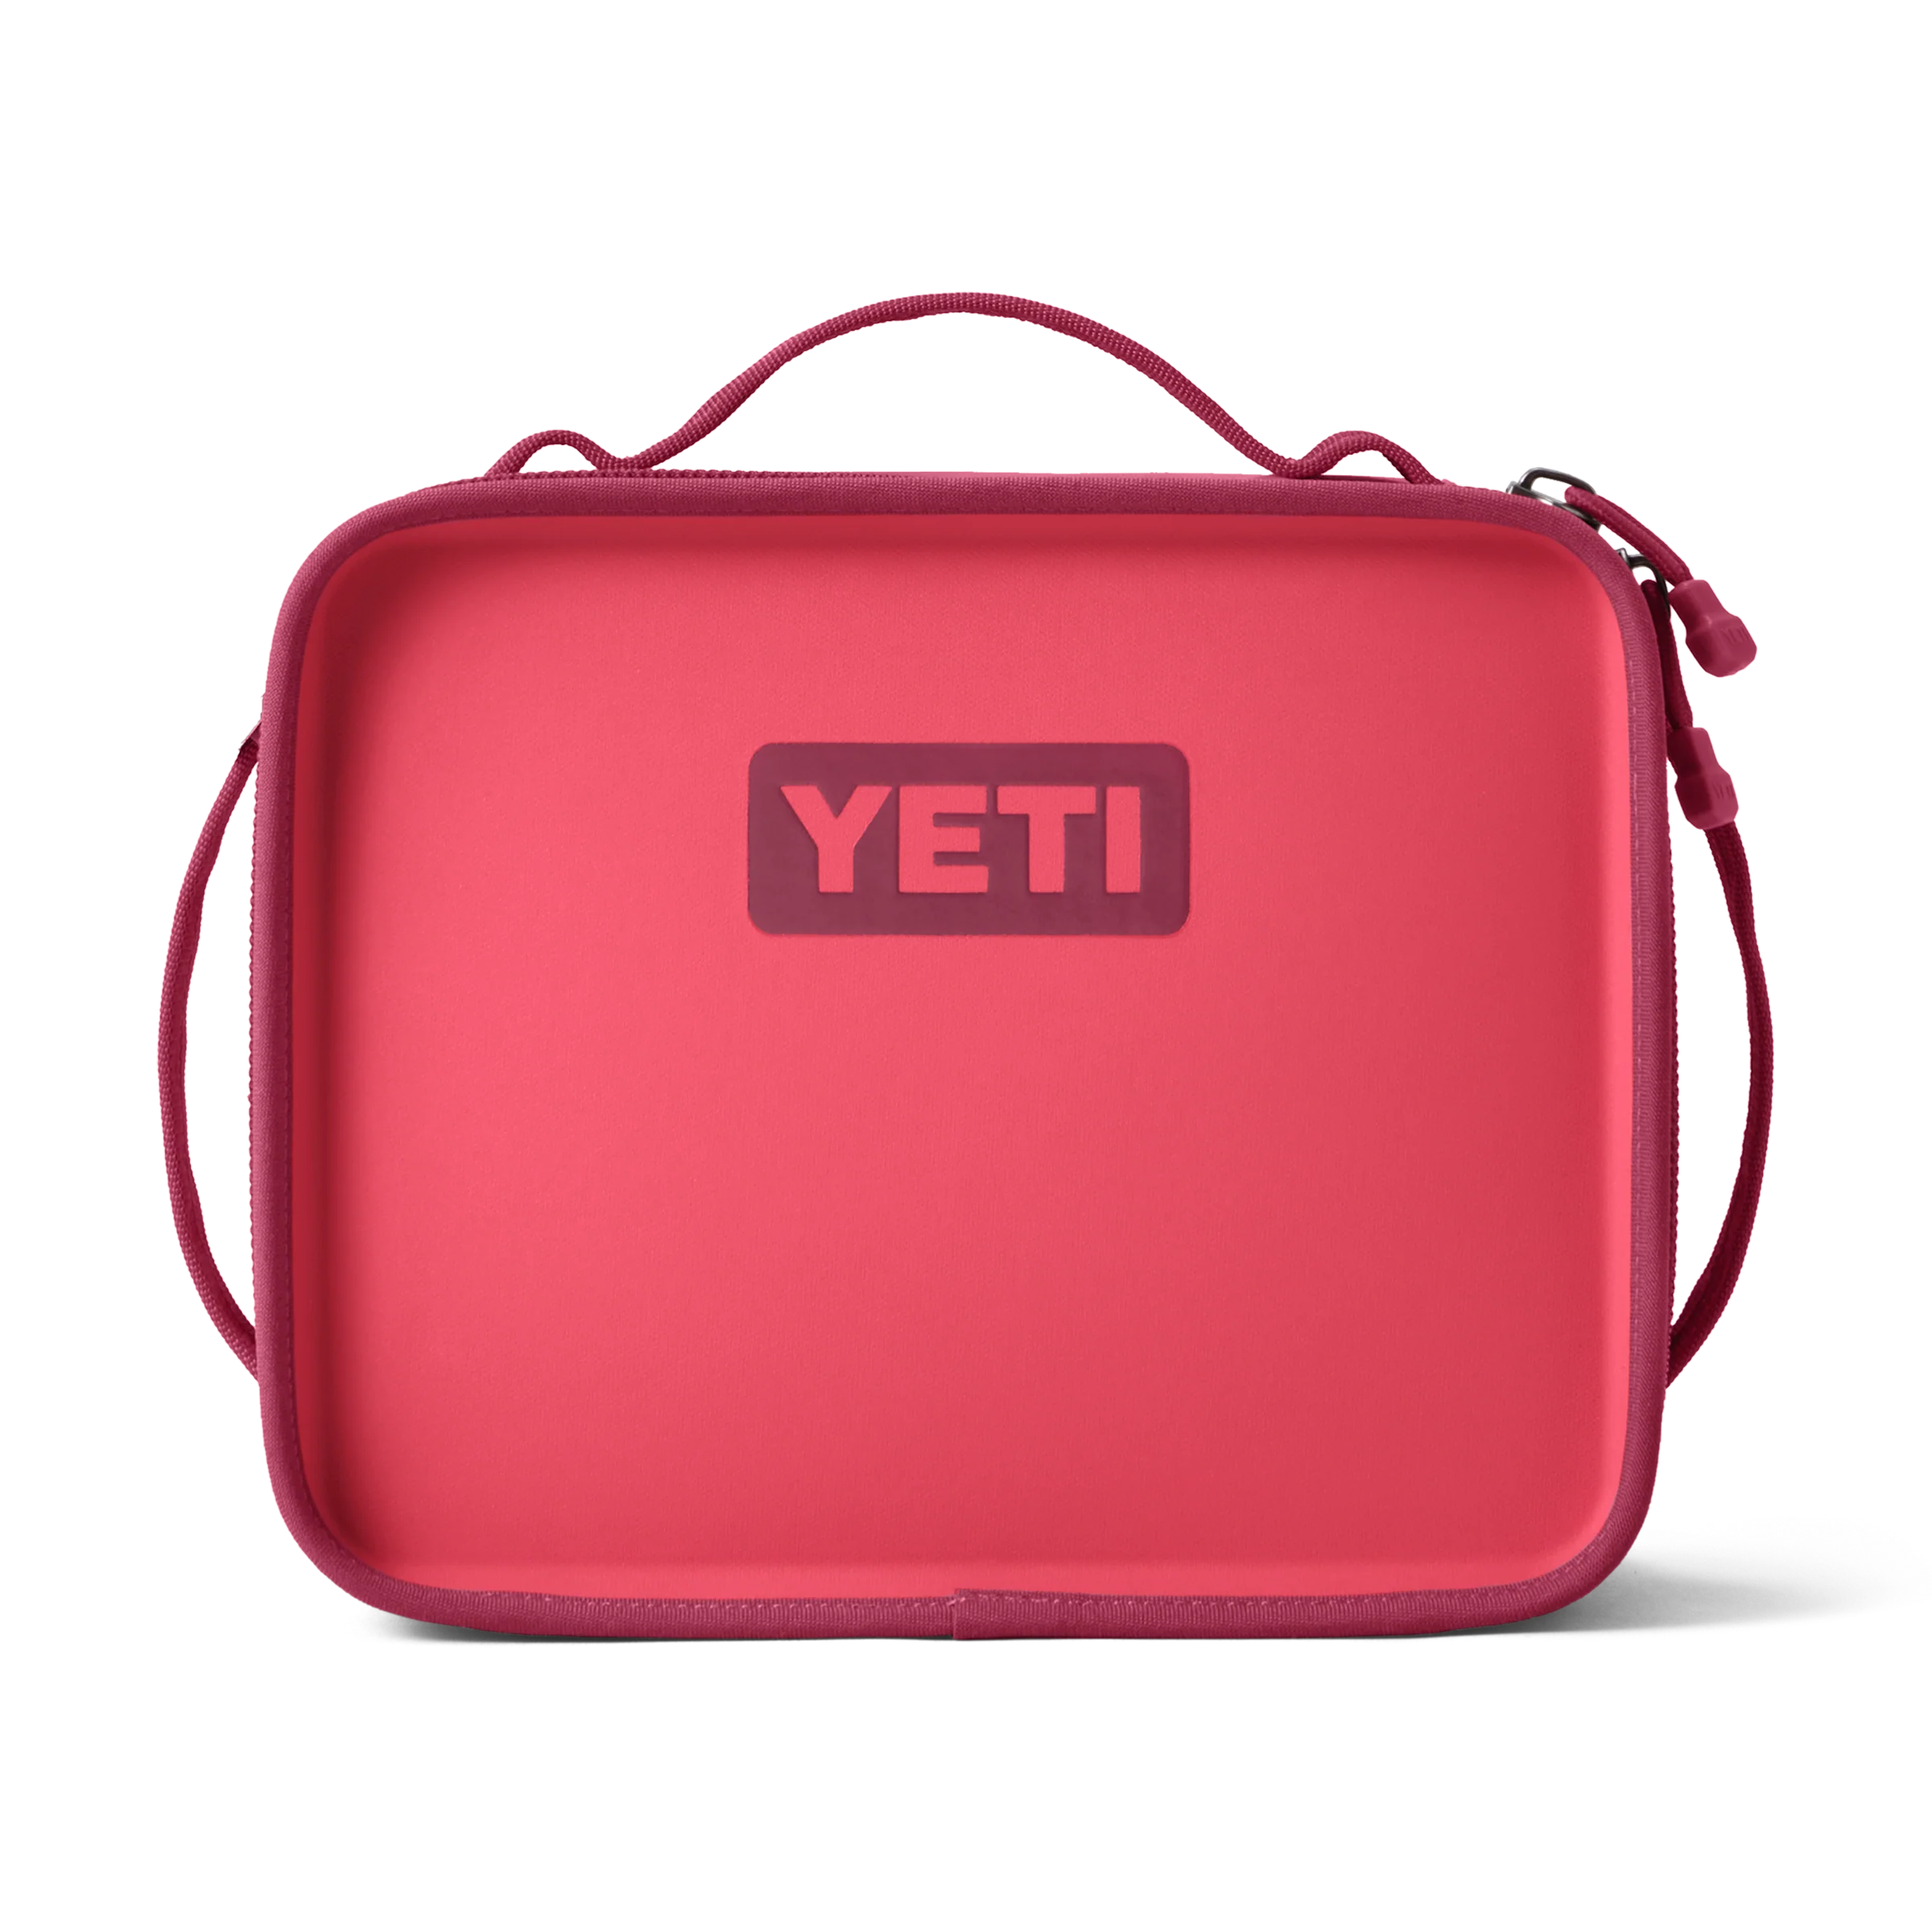 Springhill Outfitters - • D A Y T R I P • The all new YETI Daytrip lunch bag  is now in stock at SO! Perfect for back to school, a day